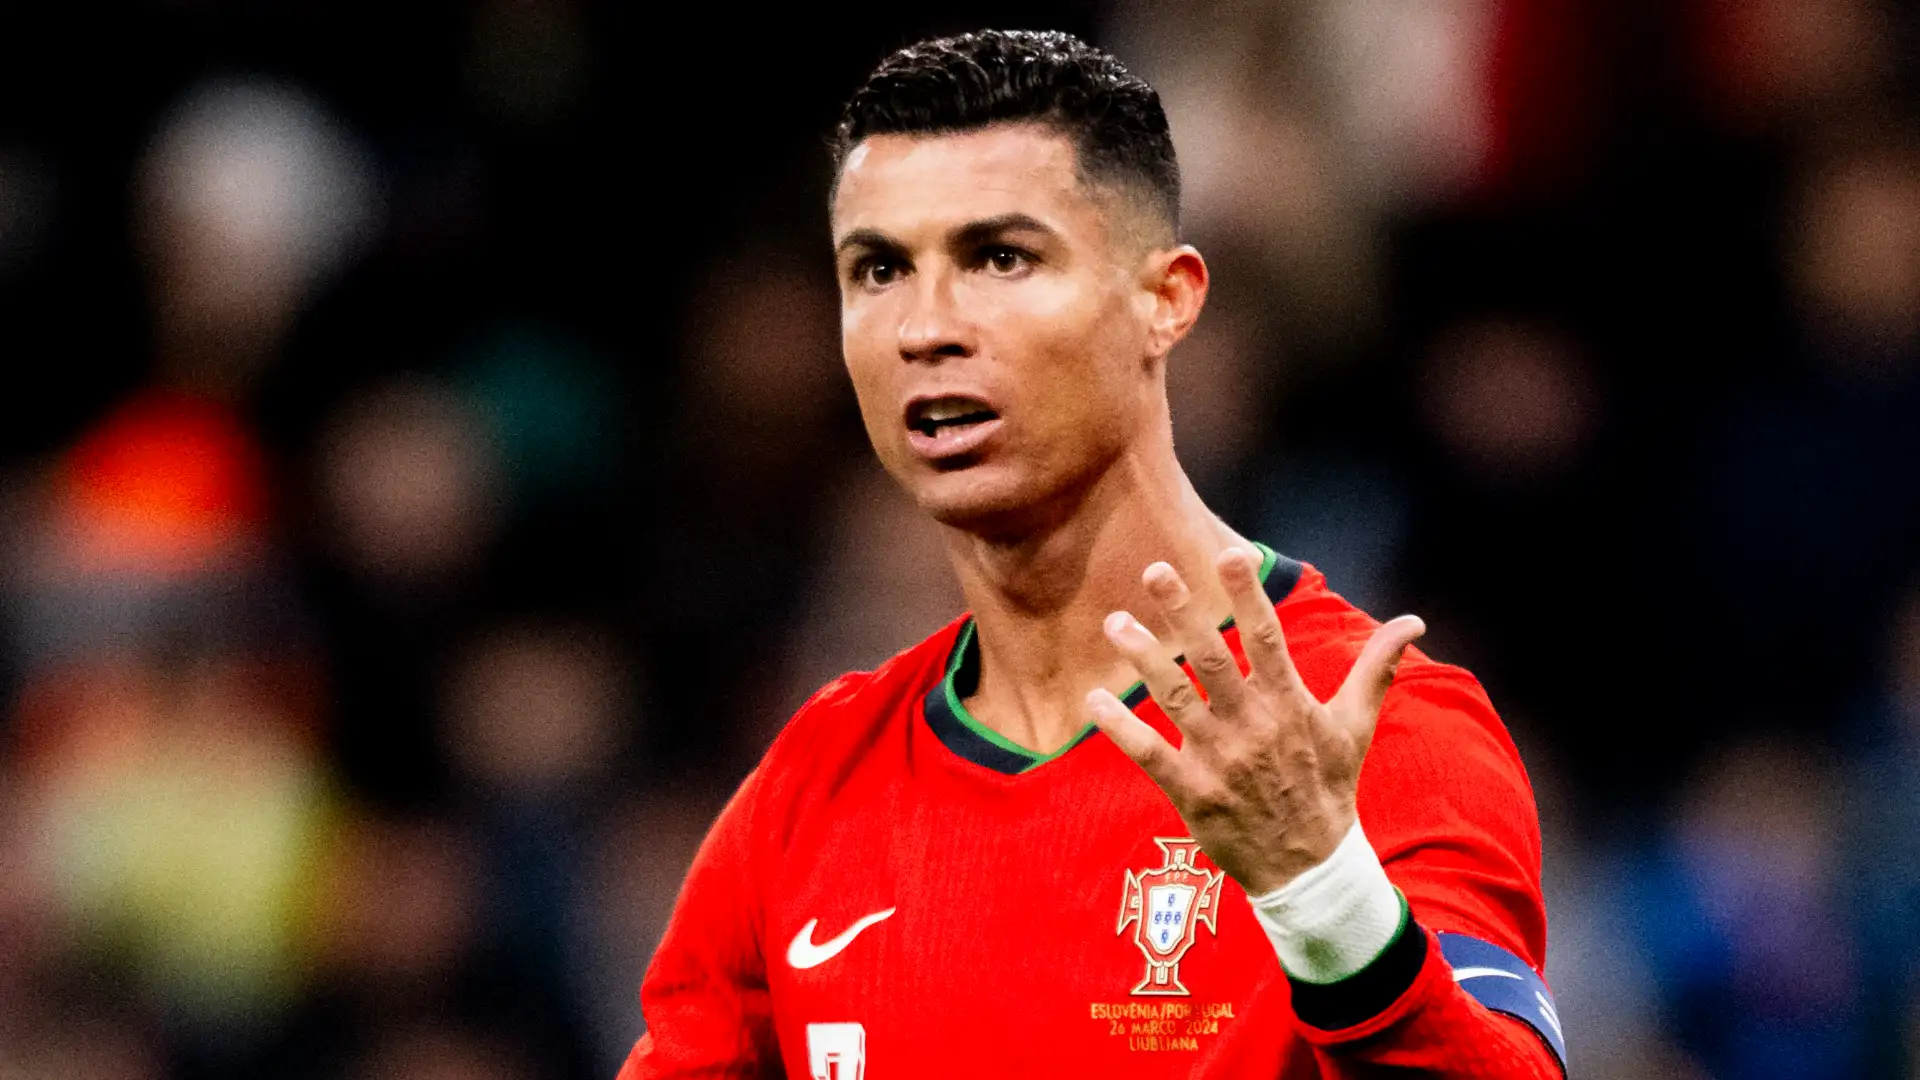 Cristiano Ronaldo to be benched after 50-goal season in ‘lesser standard’ Saudi league? Former Arsenal star makes bold Portugal selection shout ahead of Euro 2024